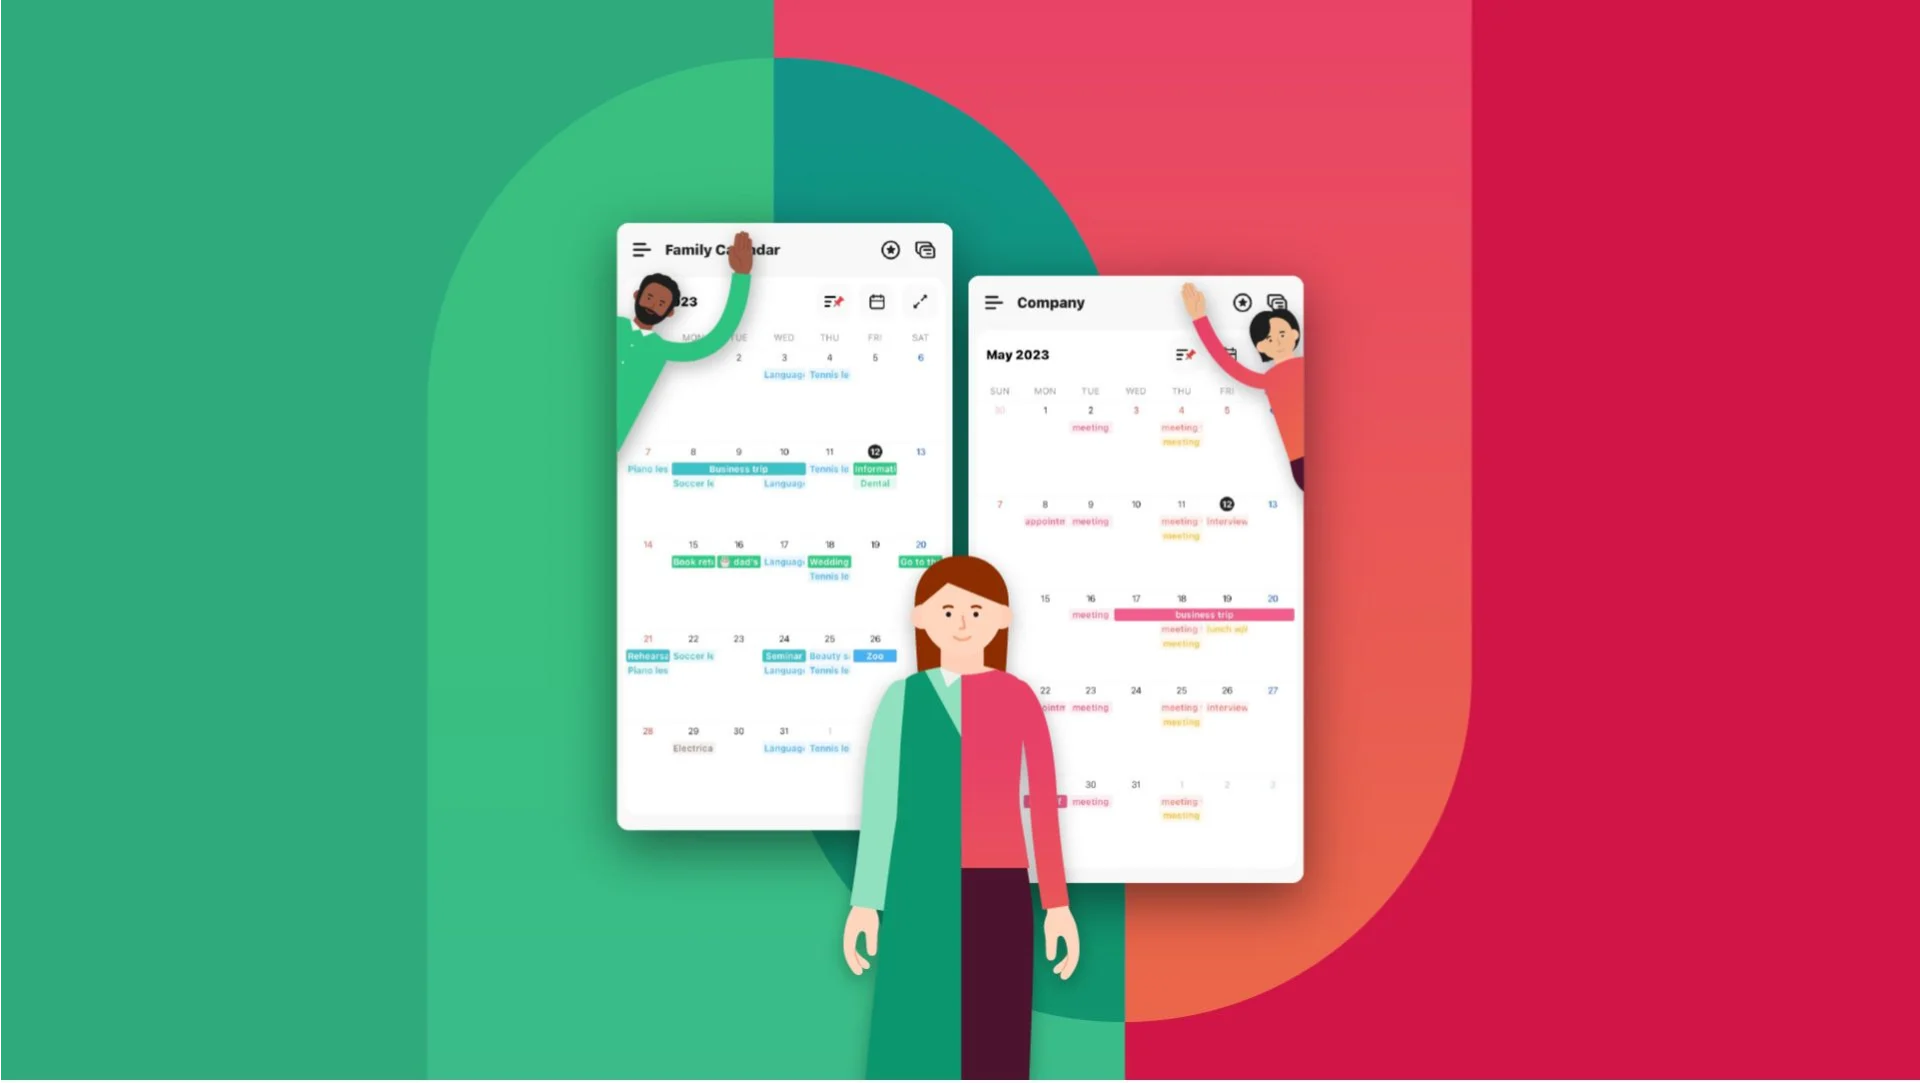 TimeTree social calendar with shared events.